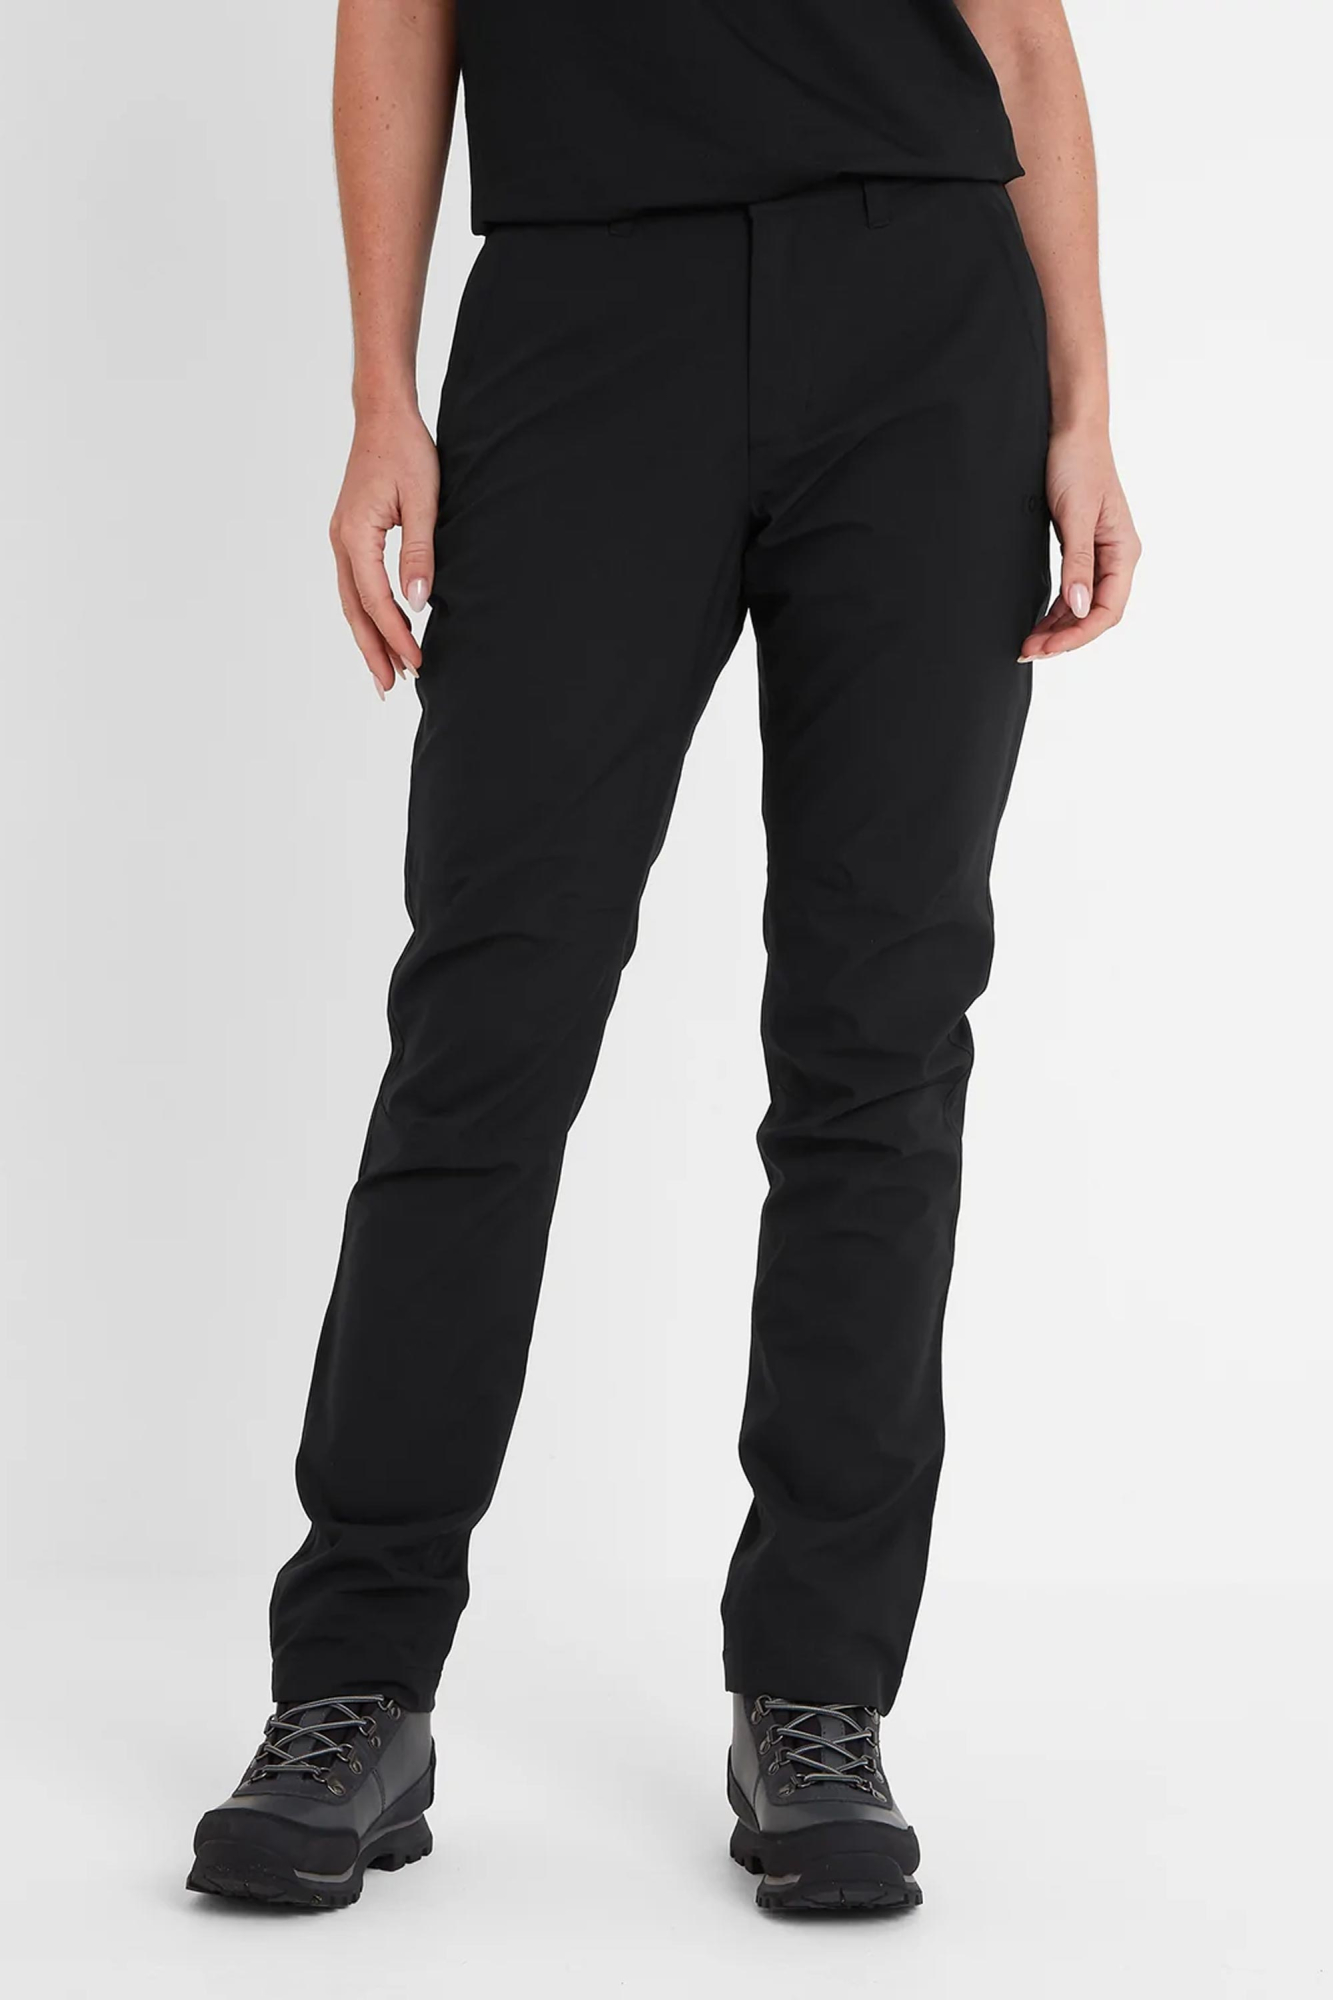 Silsden Waterproof Trousers - Size: 8S No Colour Tog24